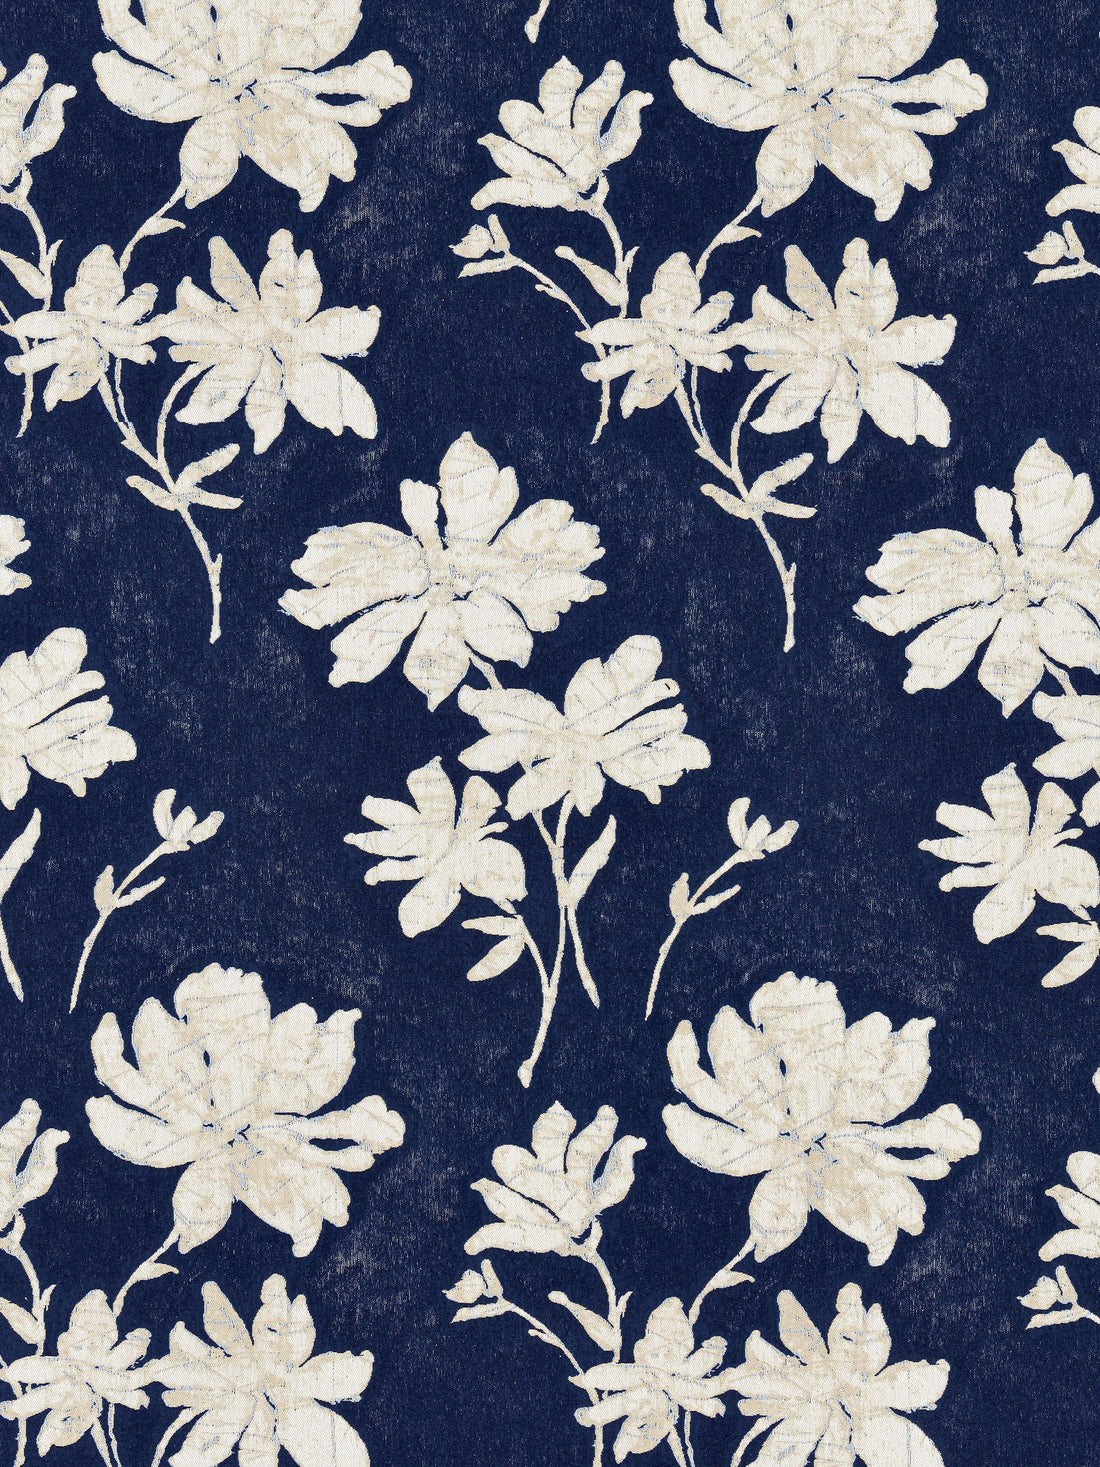 Flore Batik fabric in indigo color - pattern number SC 000227082 - by Scalamandre in the Scalamandre Fabrics Book 1 collection